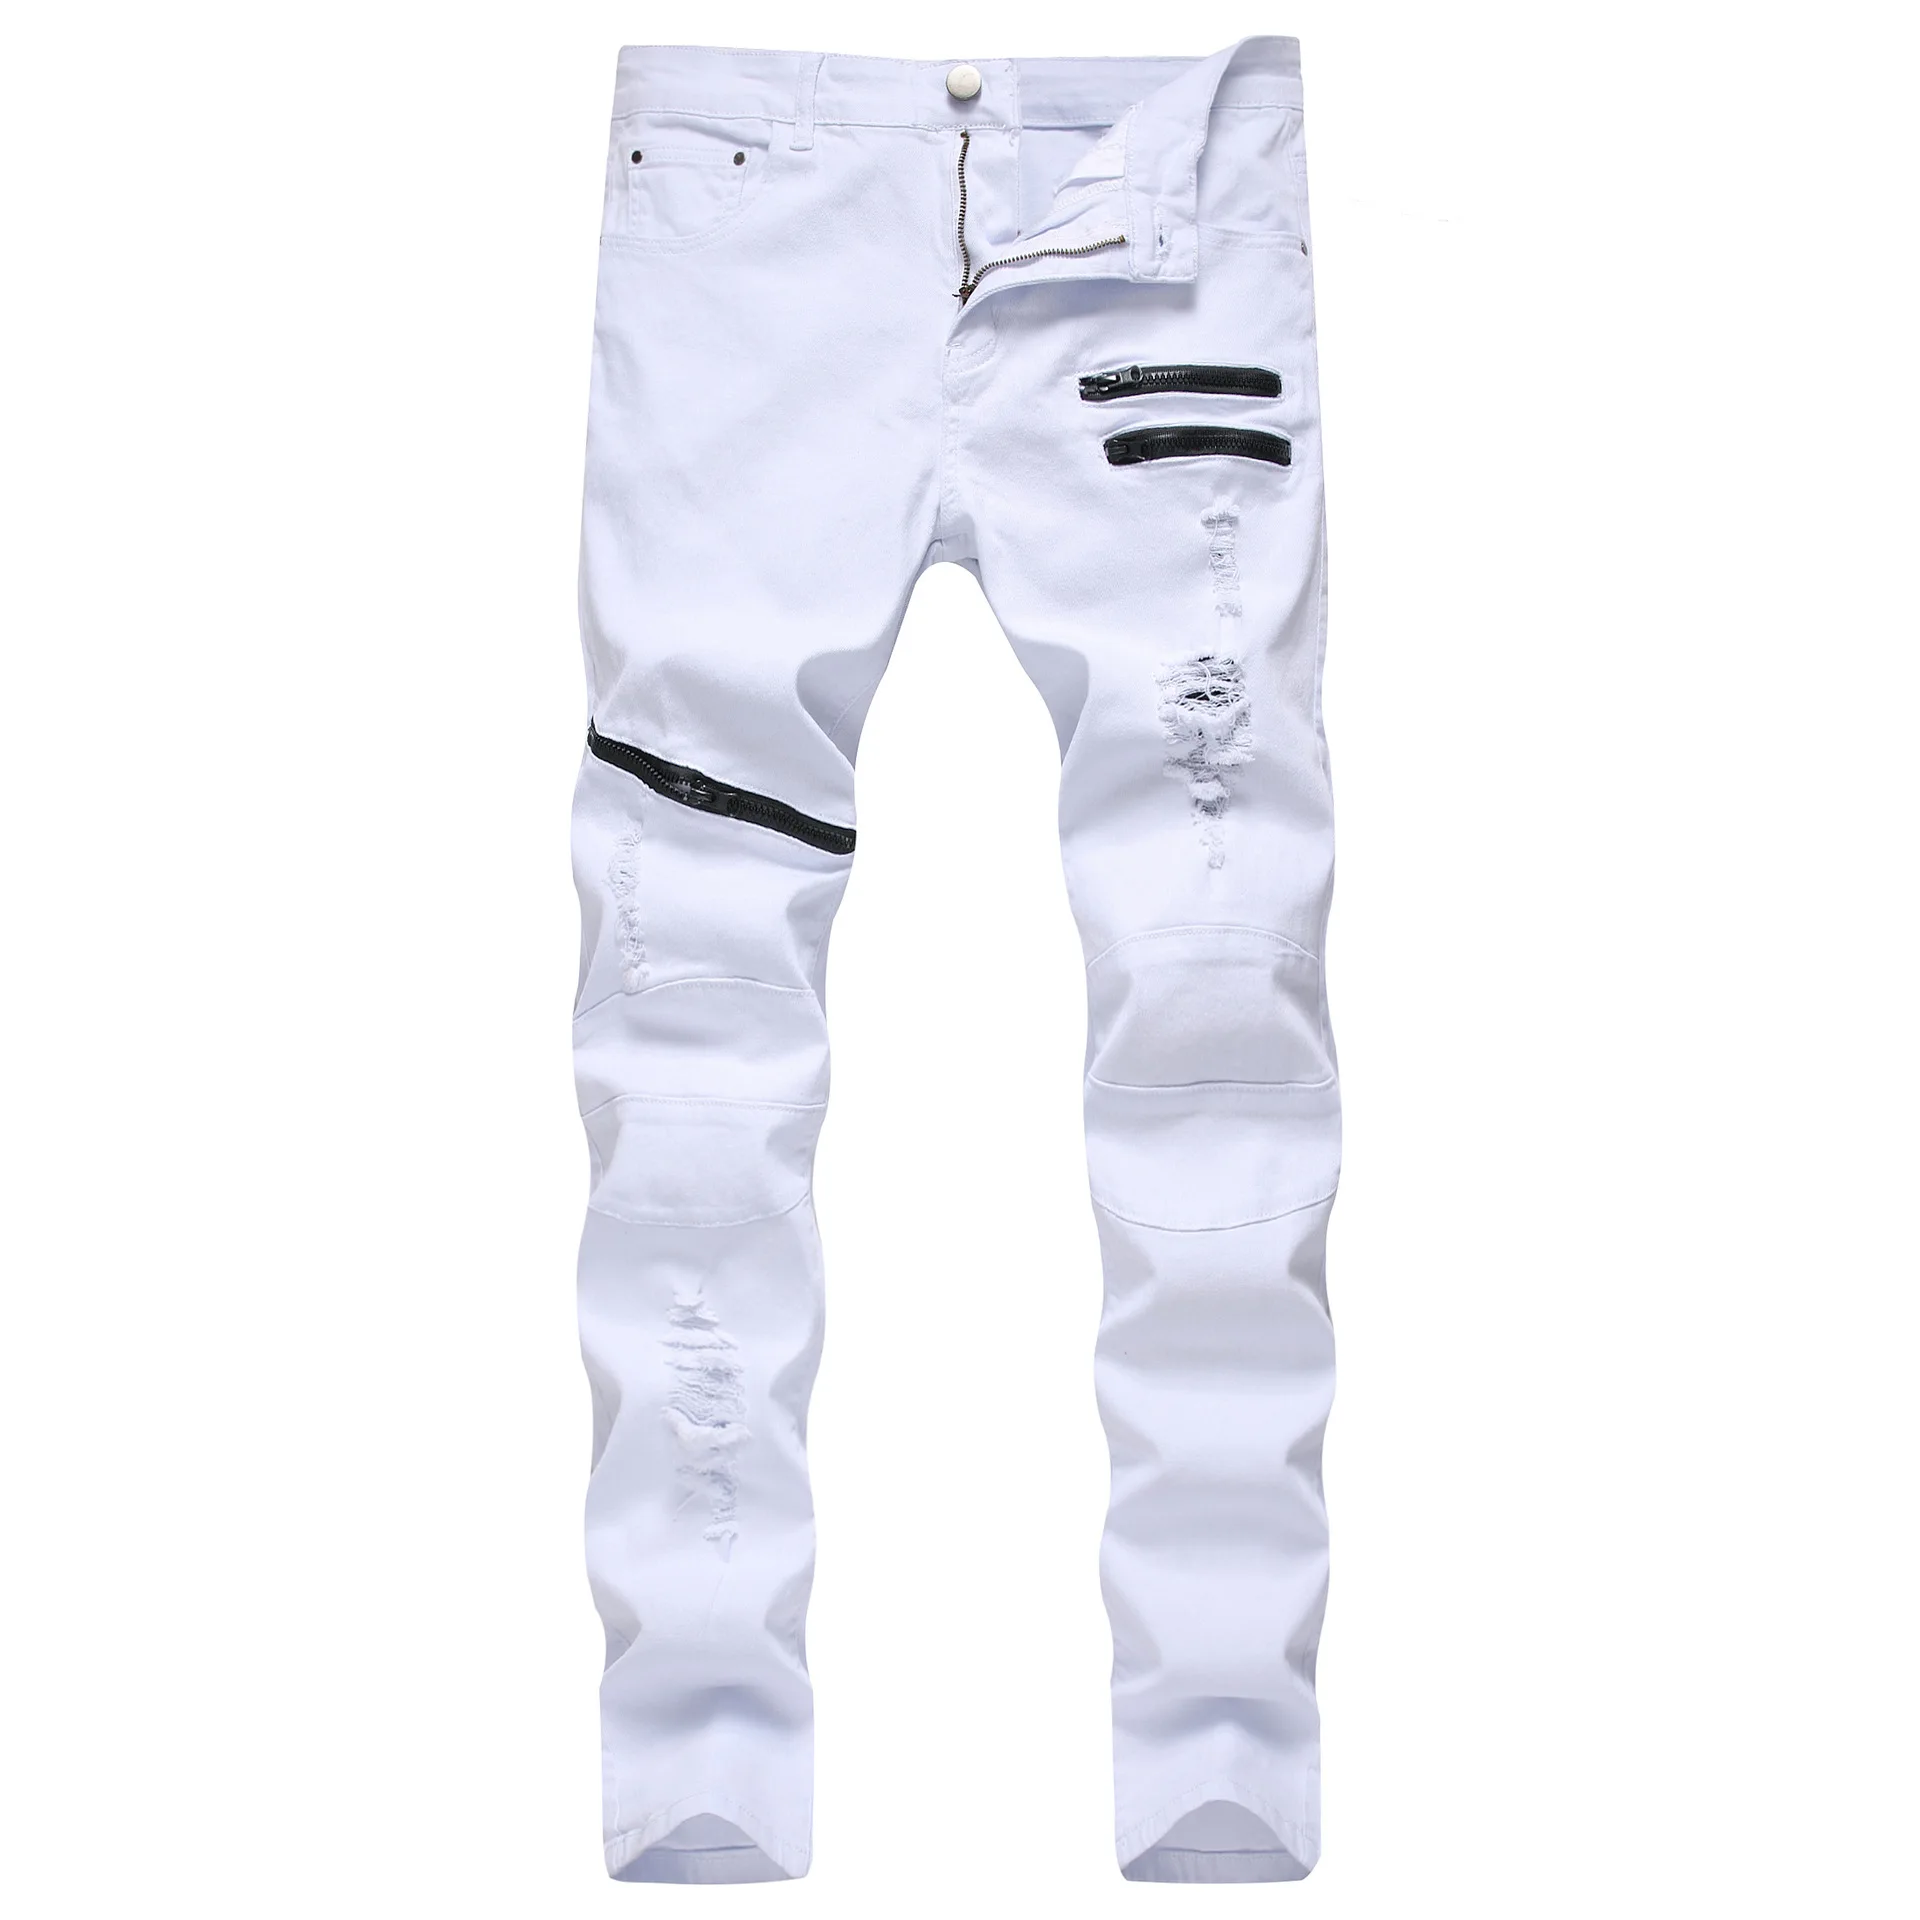 2023 Spring New Mens Hole Denim Trousers Fashion Ripped White Jeans Hip Hop Vintage Skinny Jeans Man Zip Up Casual Jean Homme 바지